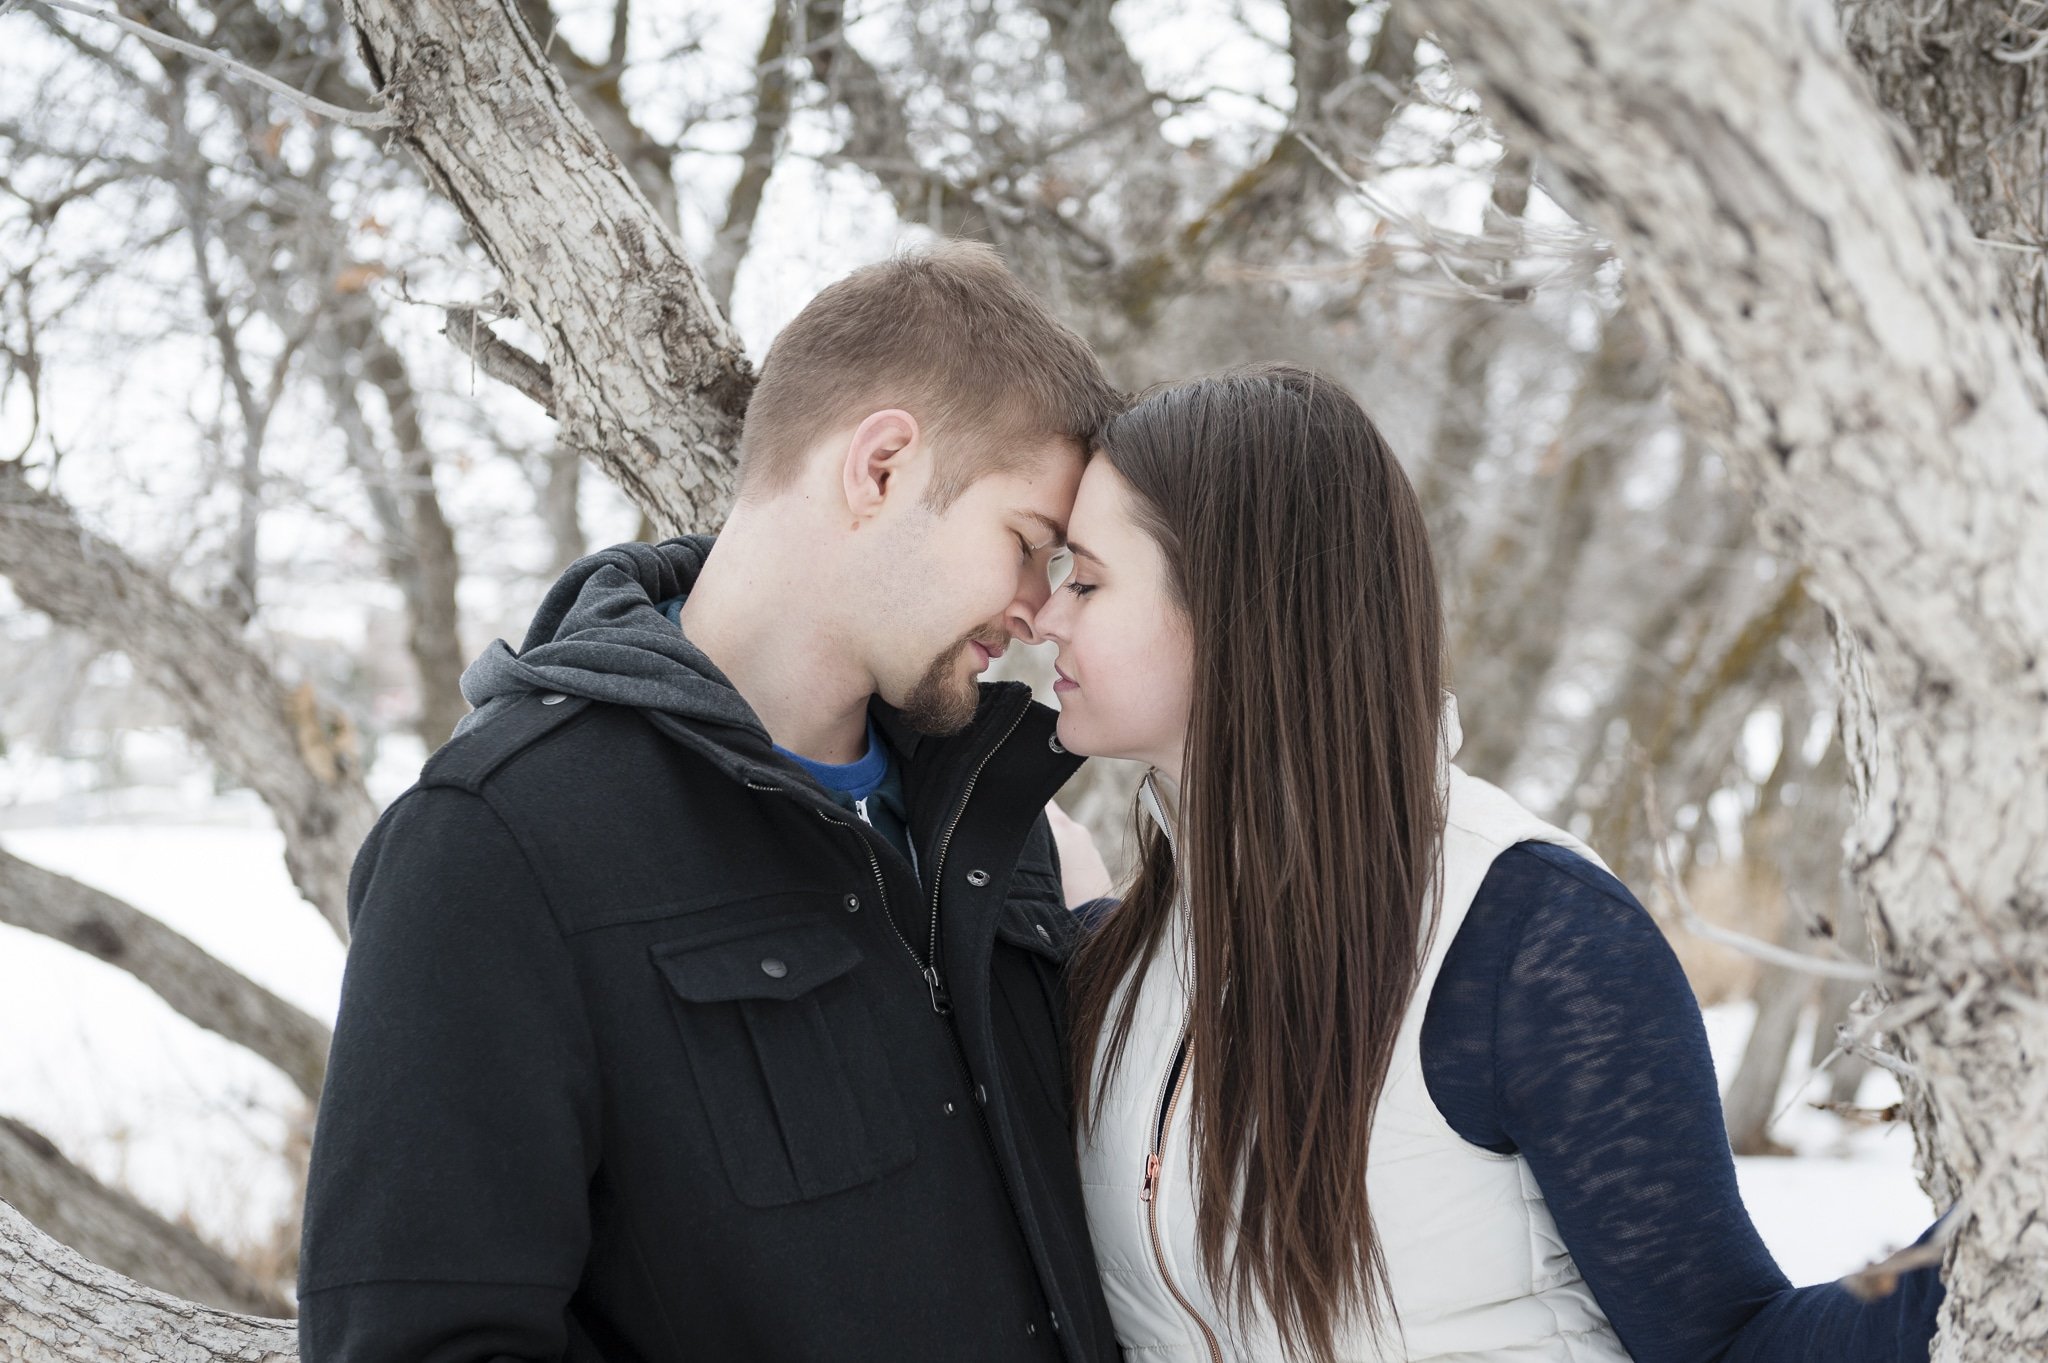 An engaged couple rub their noses together during their photo session in the winter.